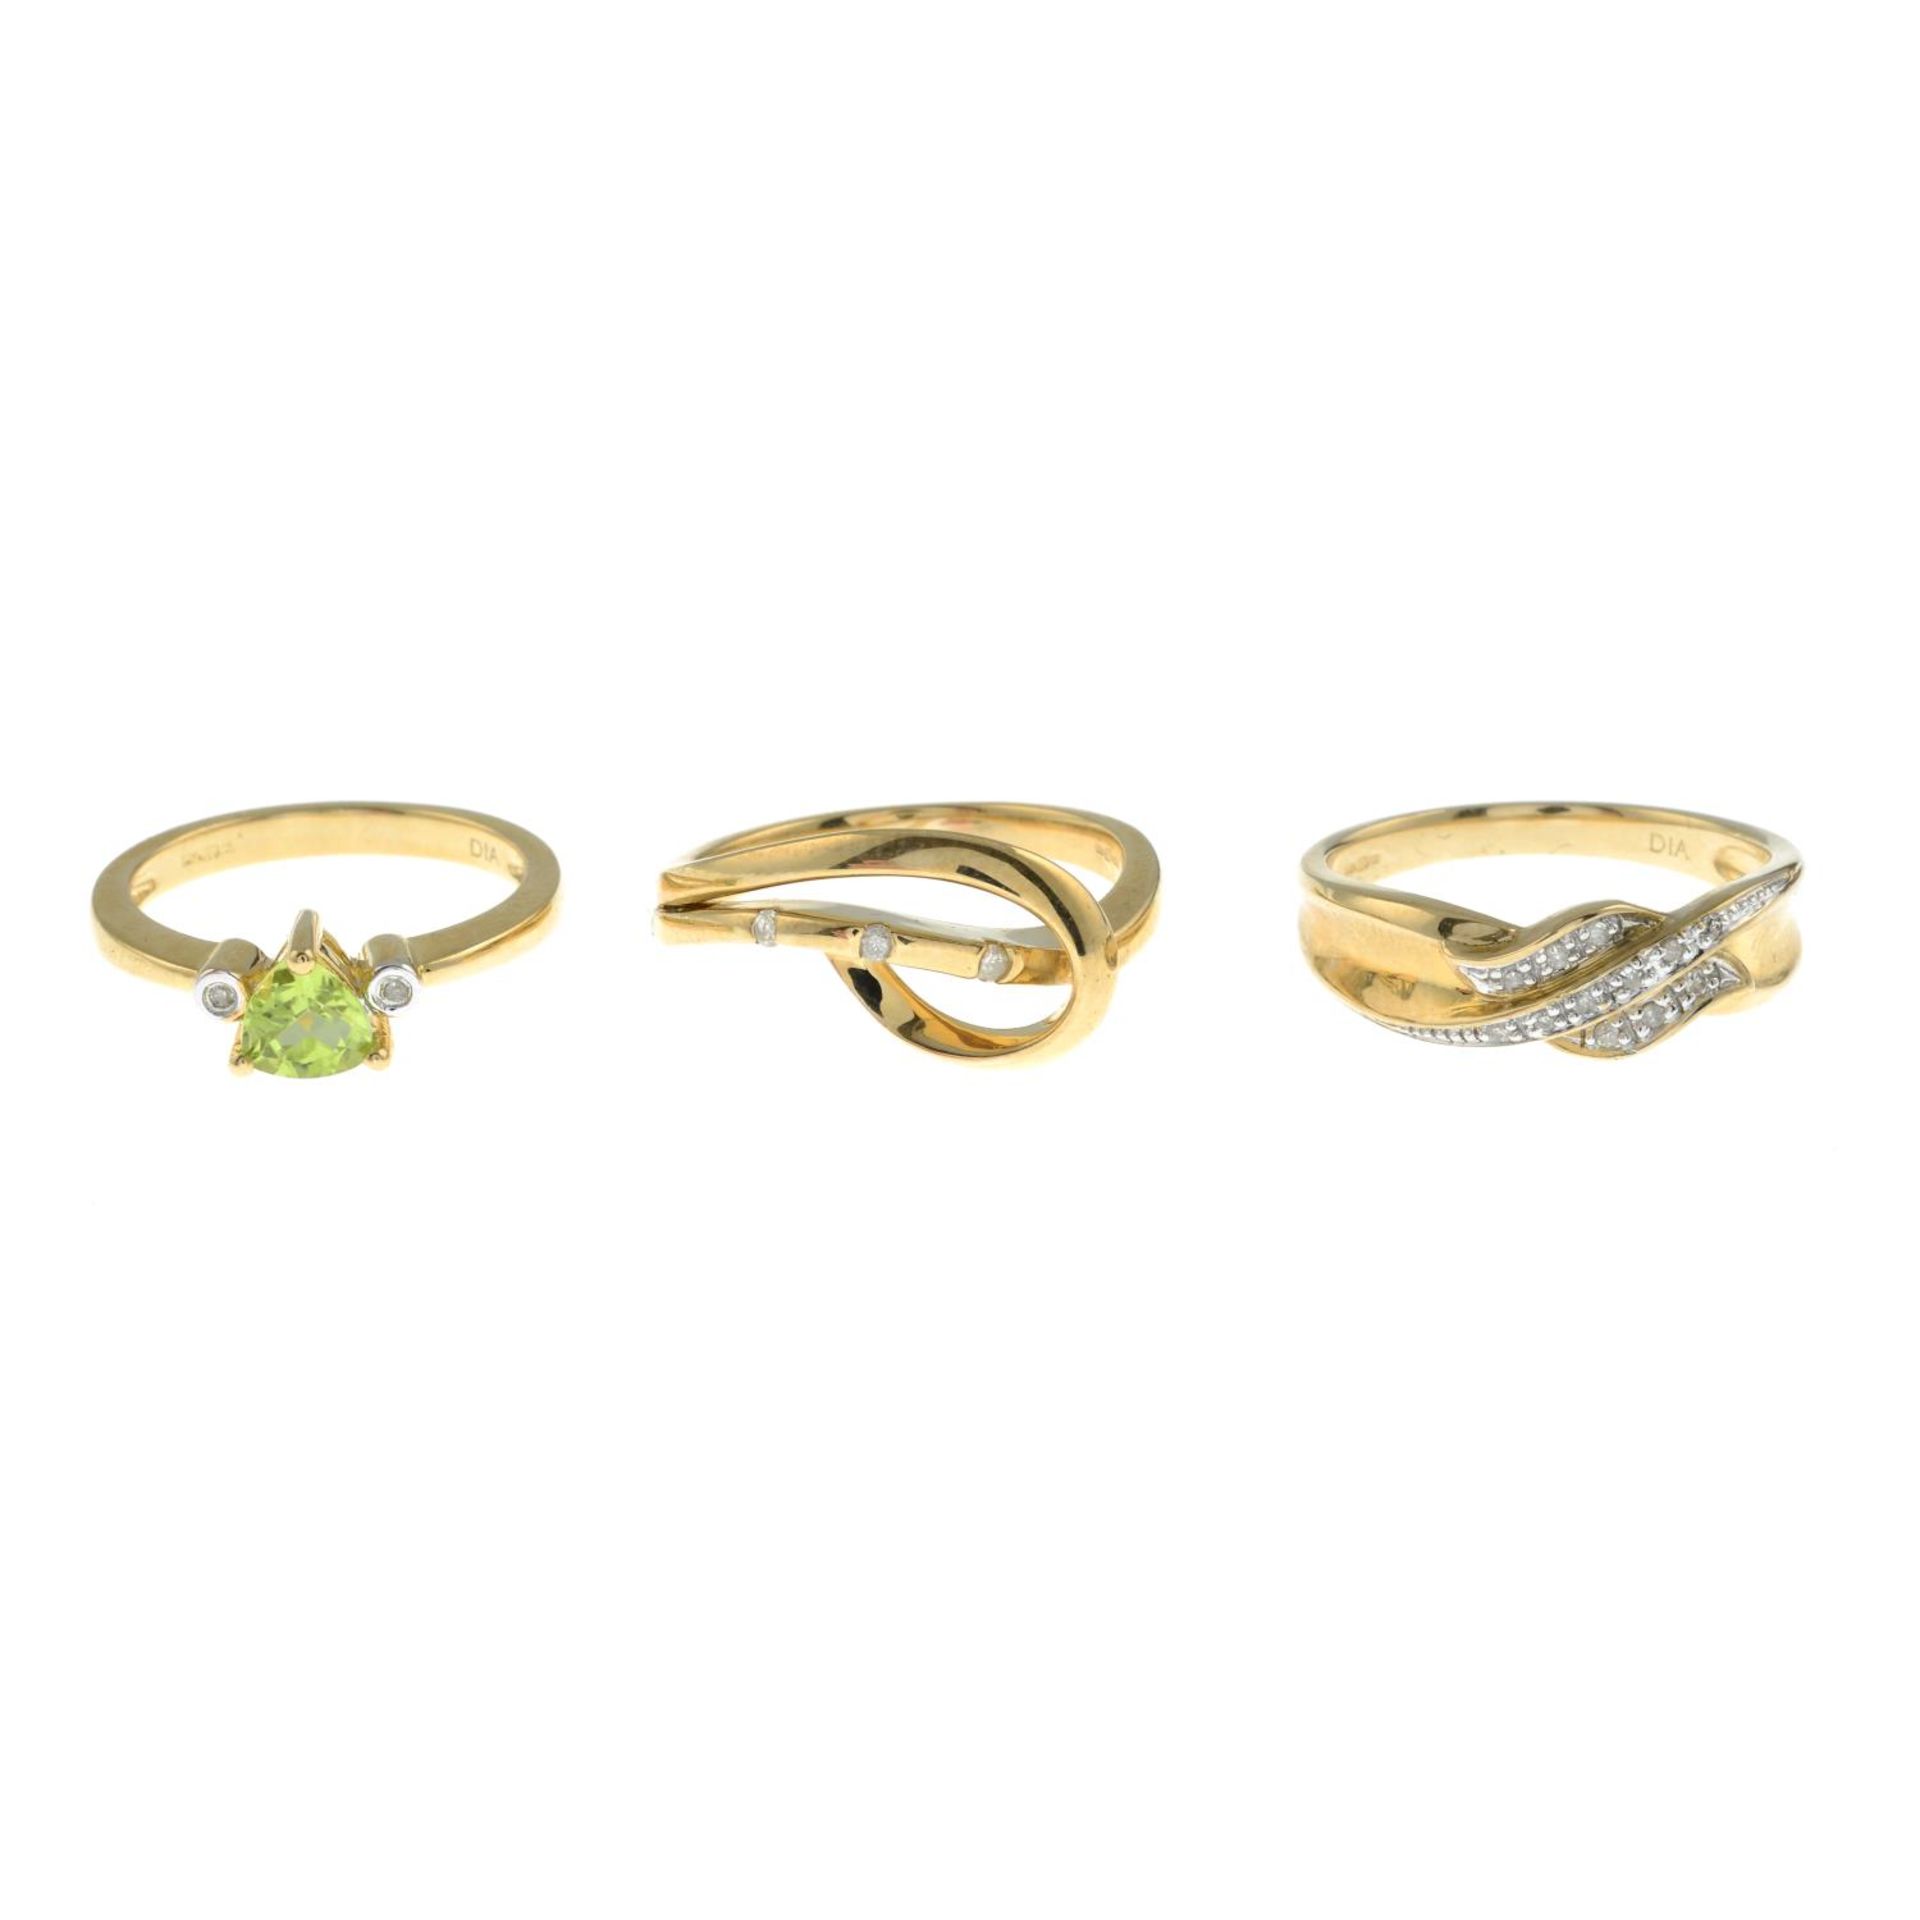 Three 9ct gold diamond and gem-set dress rings, to include a peridot and diamond ring.